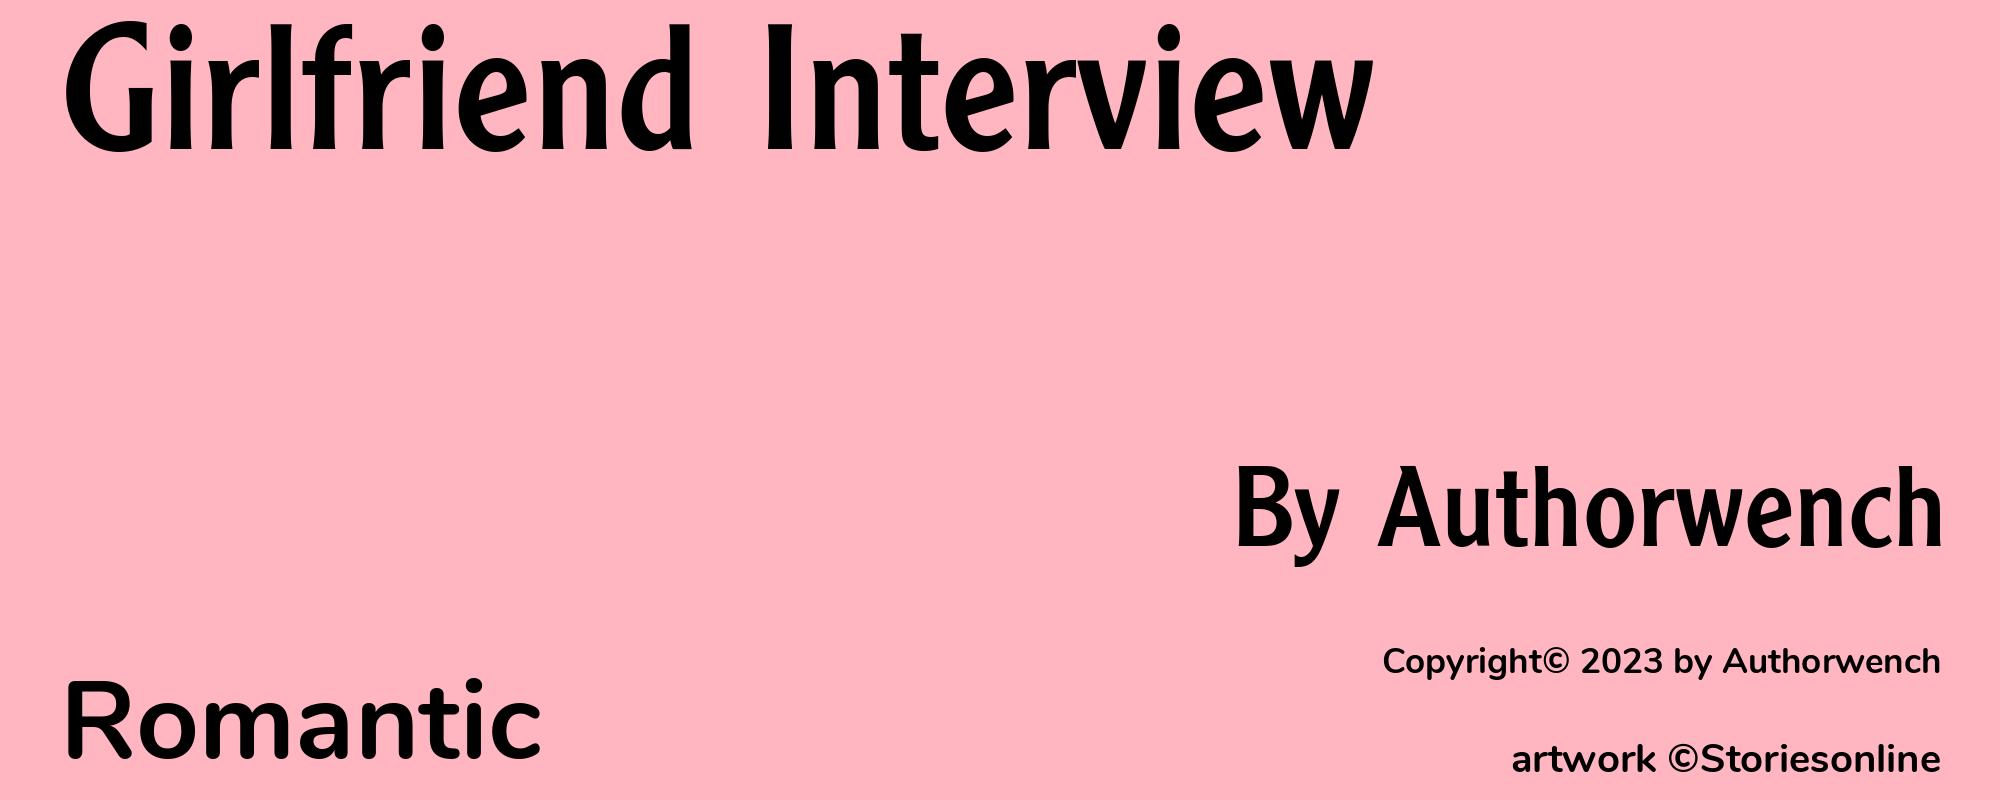 Girlfriend Interview - Cover